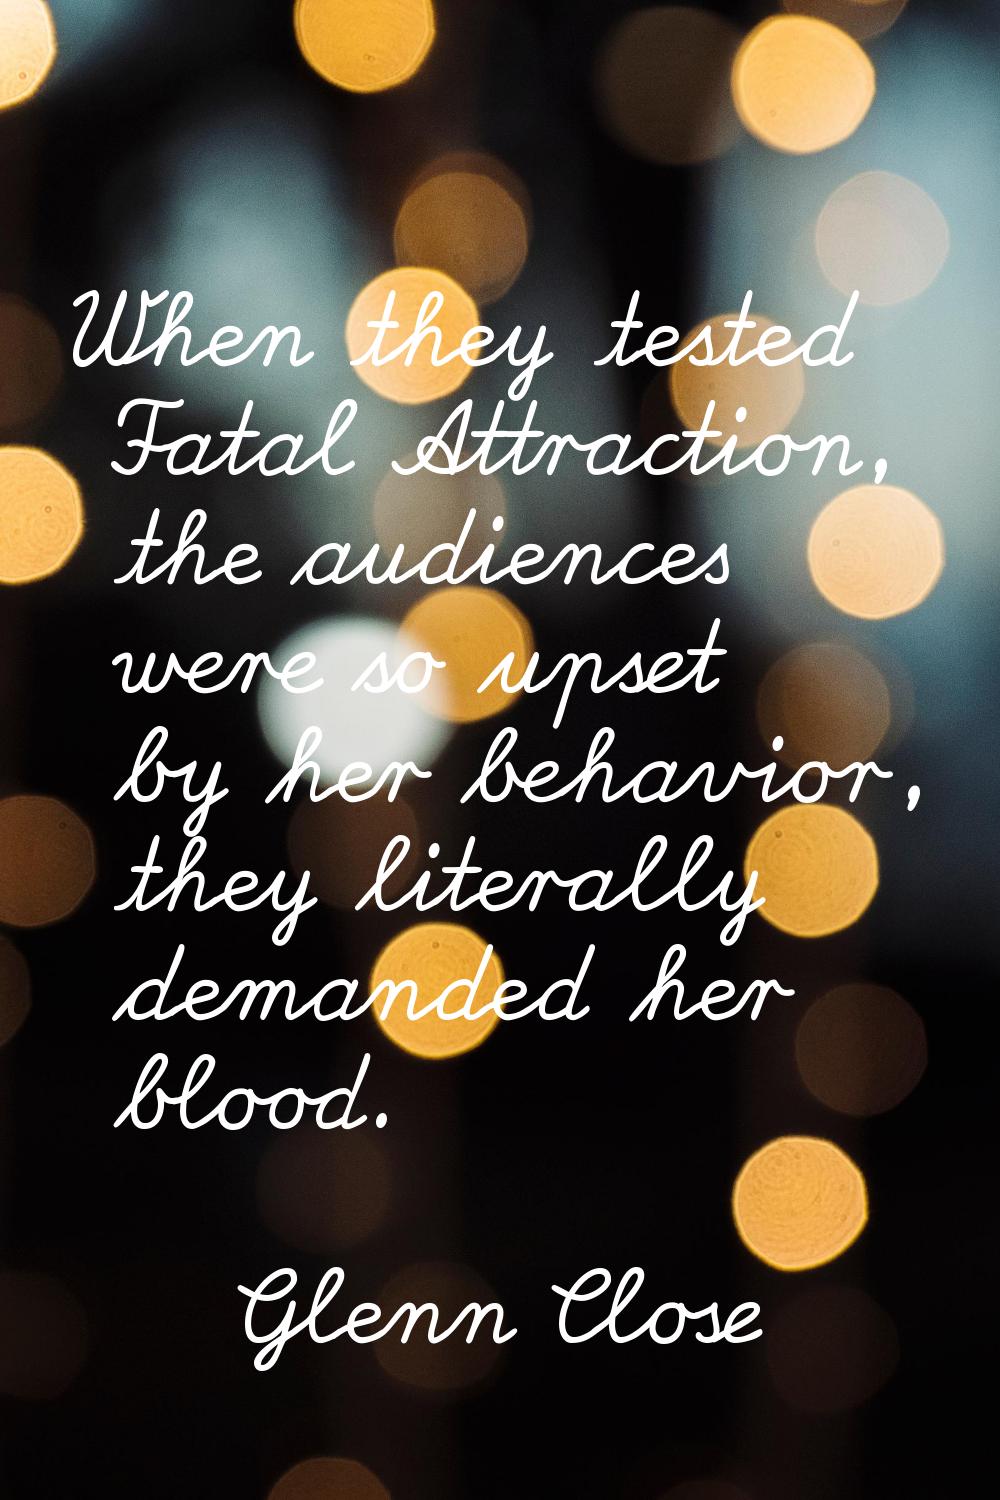 When they tested Fatal Attraction, the audiences were so upset by her behavior, they literally dema